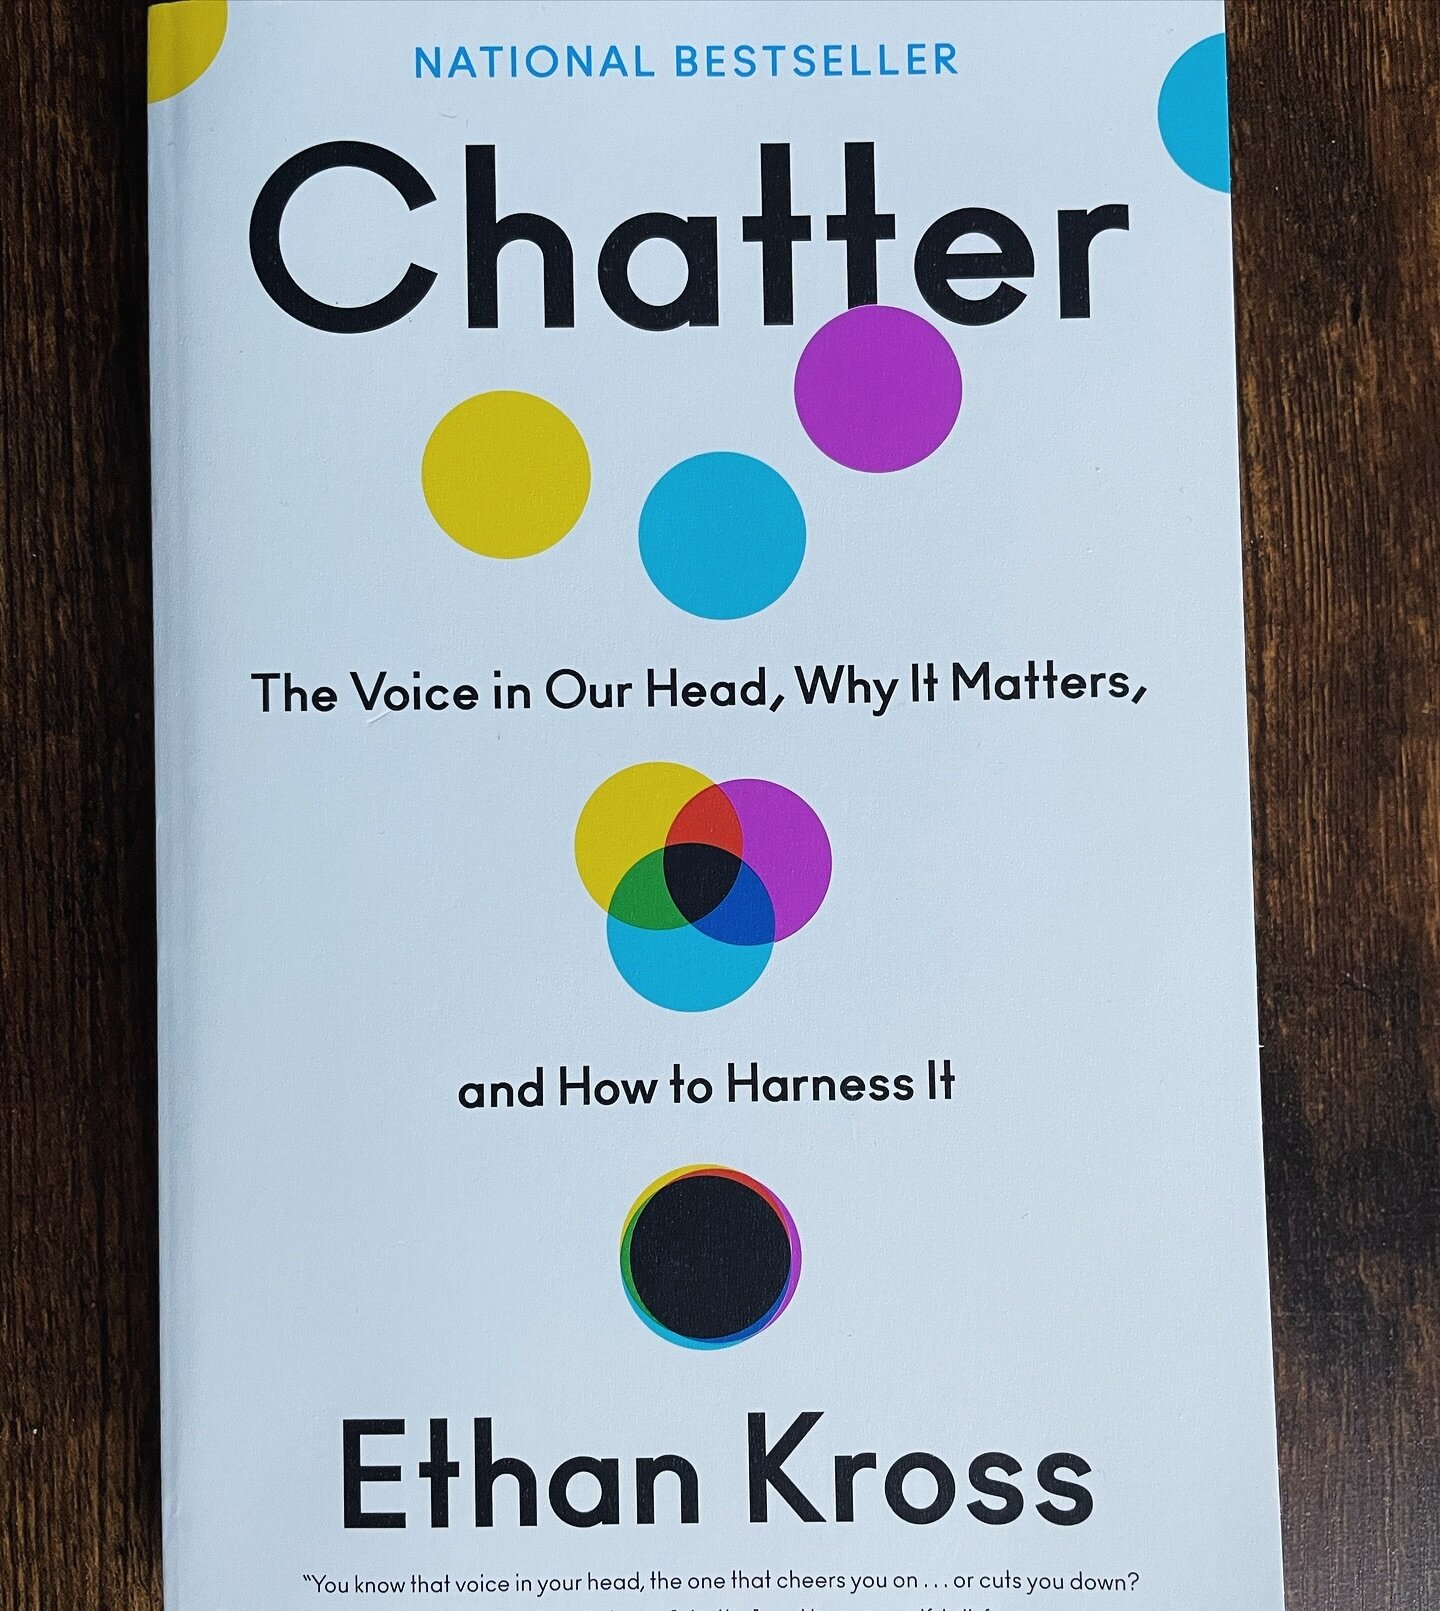 Finished reading Chatter by Ethan Kross which was gifted to me by a dear friend and fellow introvert. ❤️ Interesting to read about the inner voice in your head from the scientific perspective. Also picked up a lot of tools on dealing with negative in